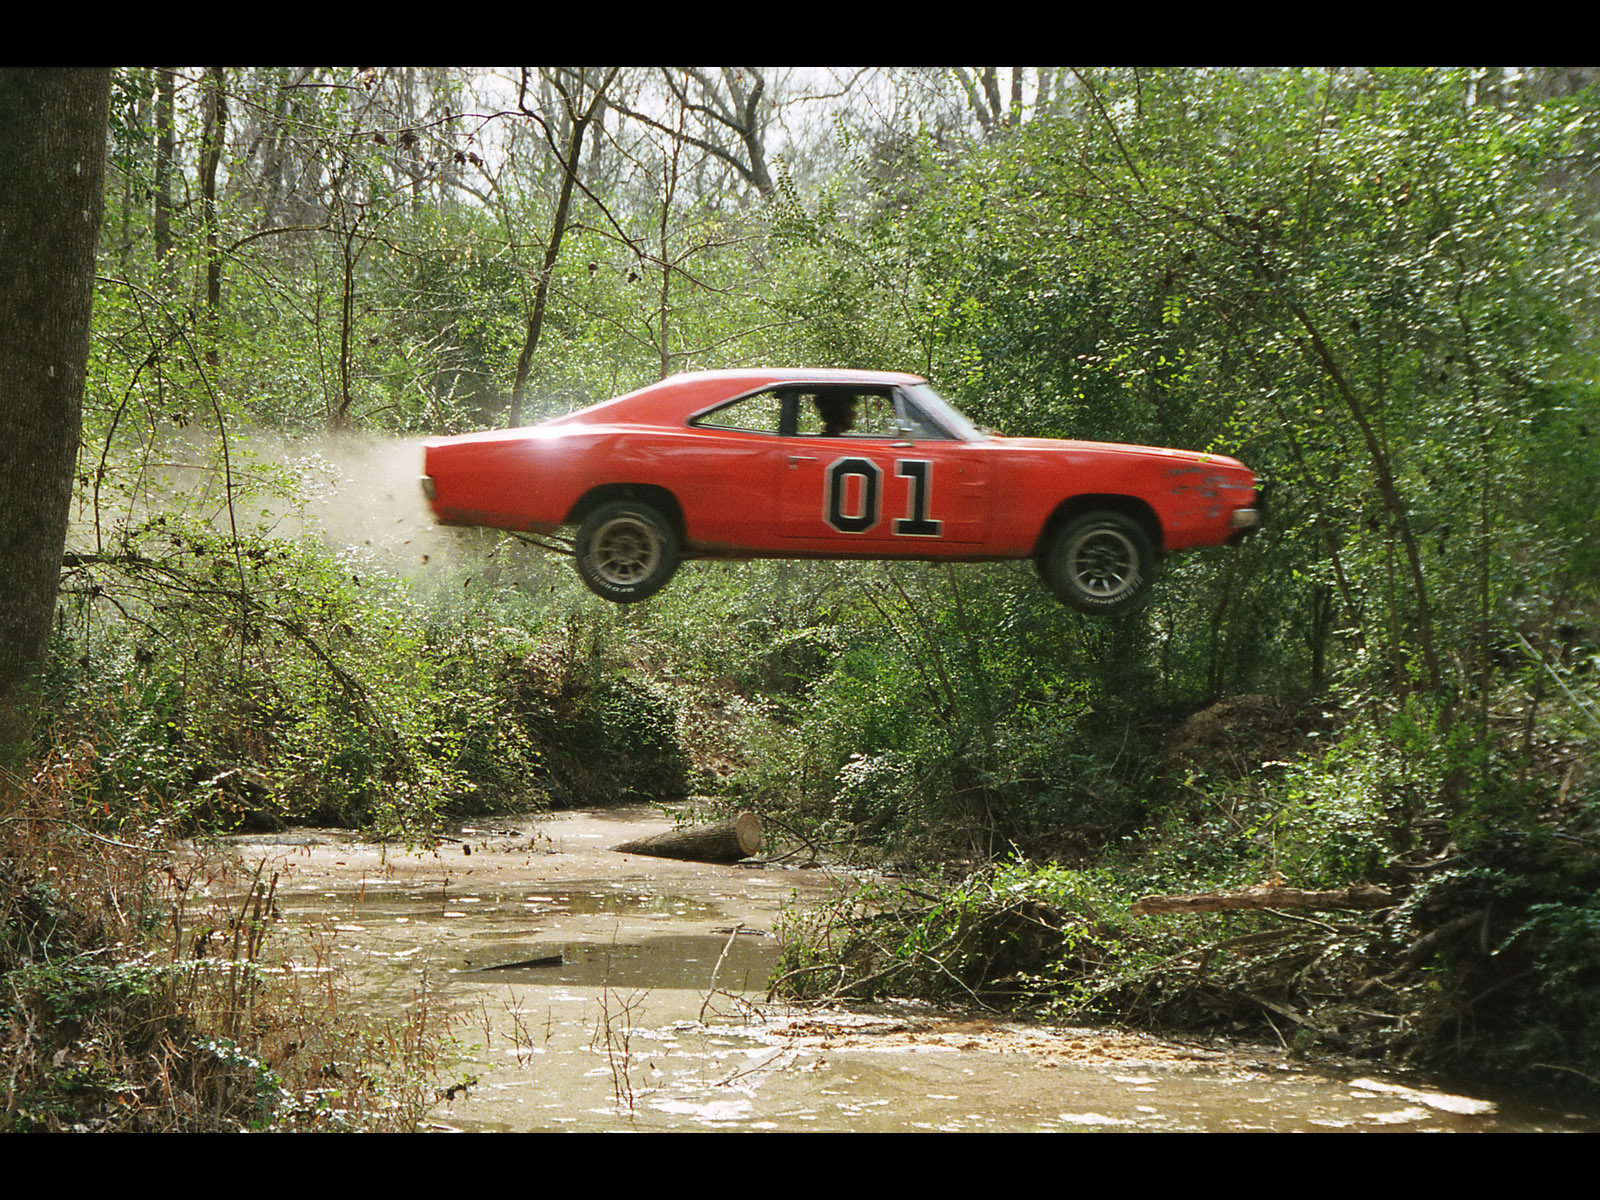  BangShift Daily Tune Up: The General Lee - Johnny Cash (1983)  